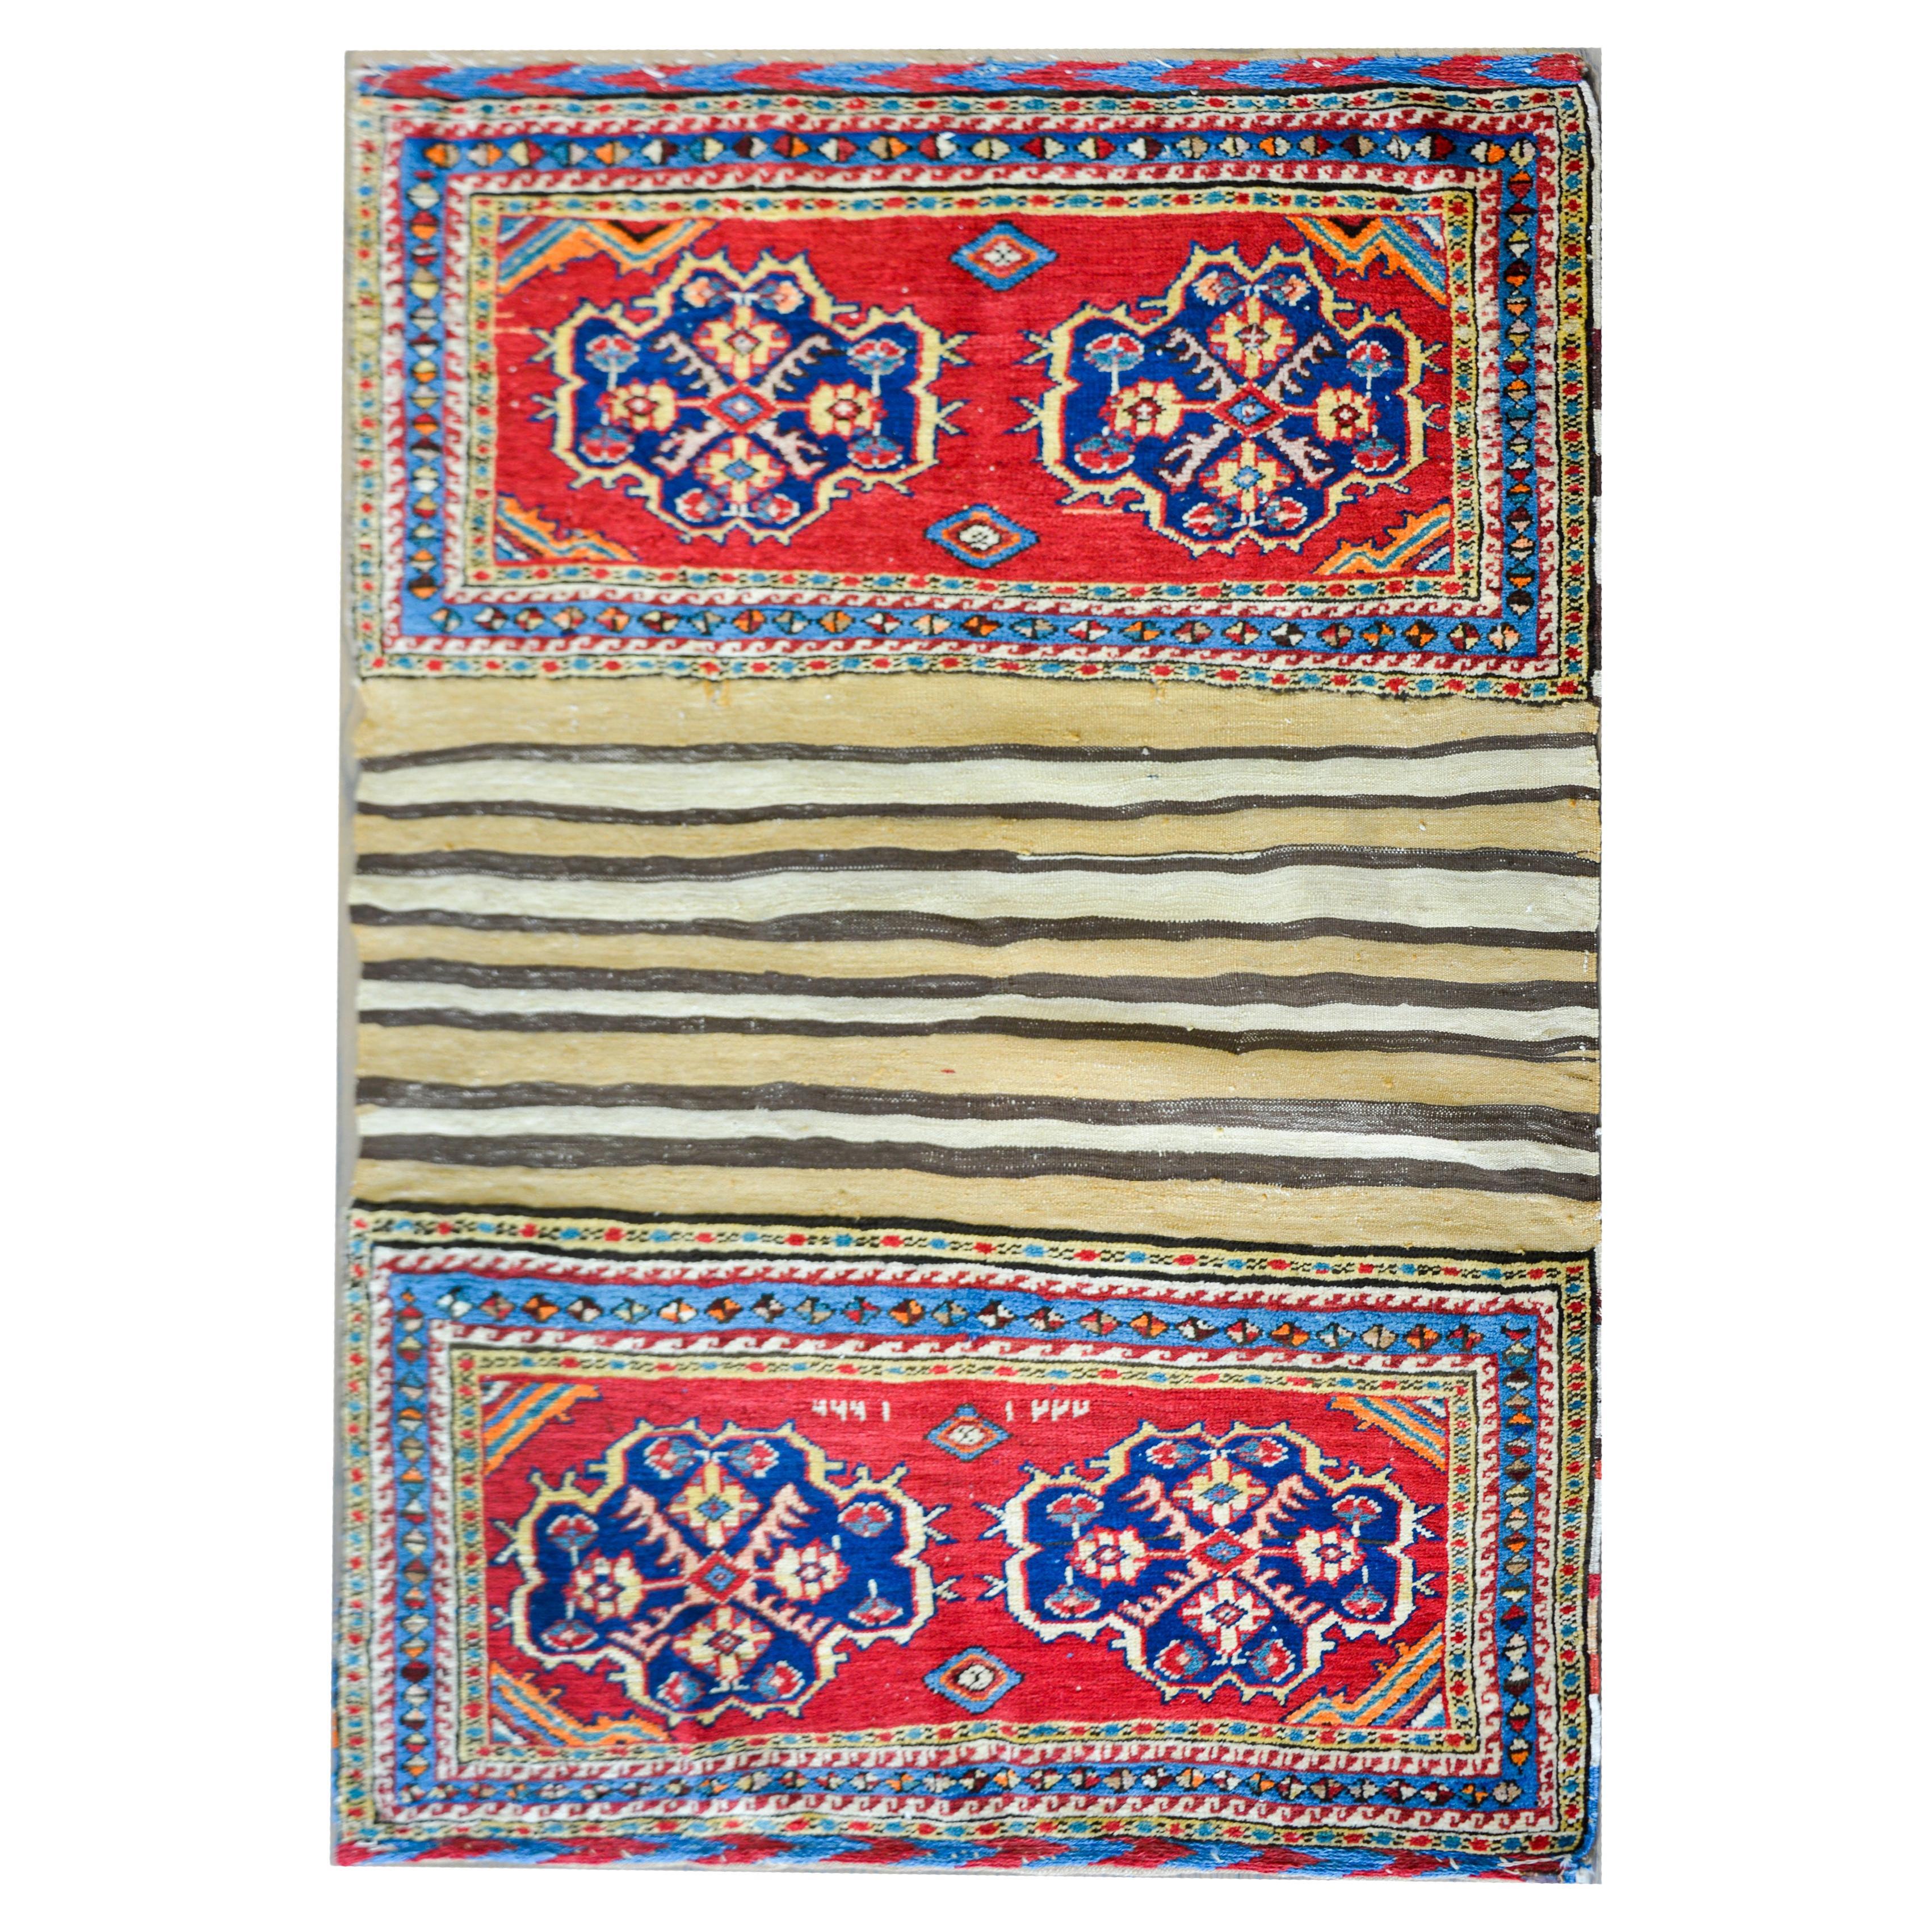 Early 20th Century Persian Lori Horse Blanket For Sale